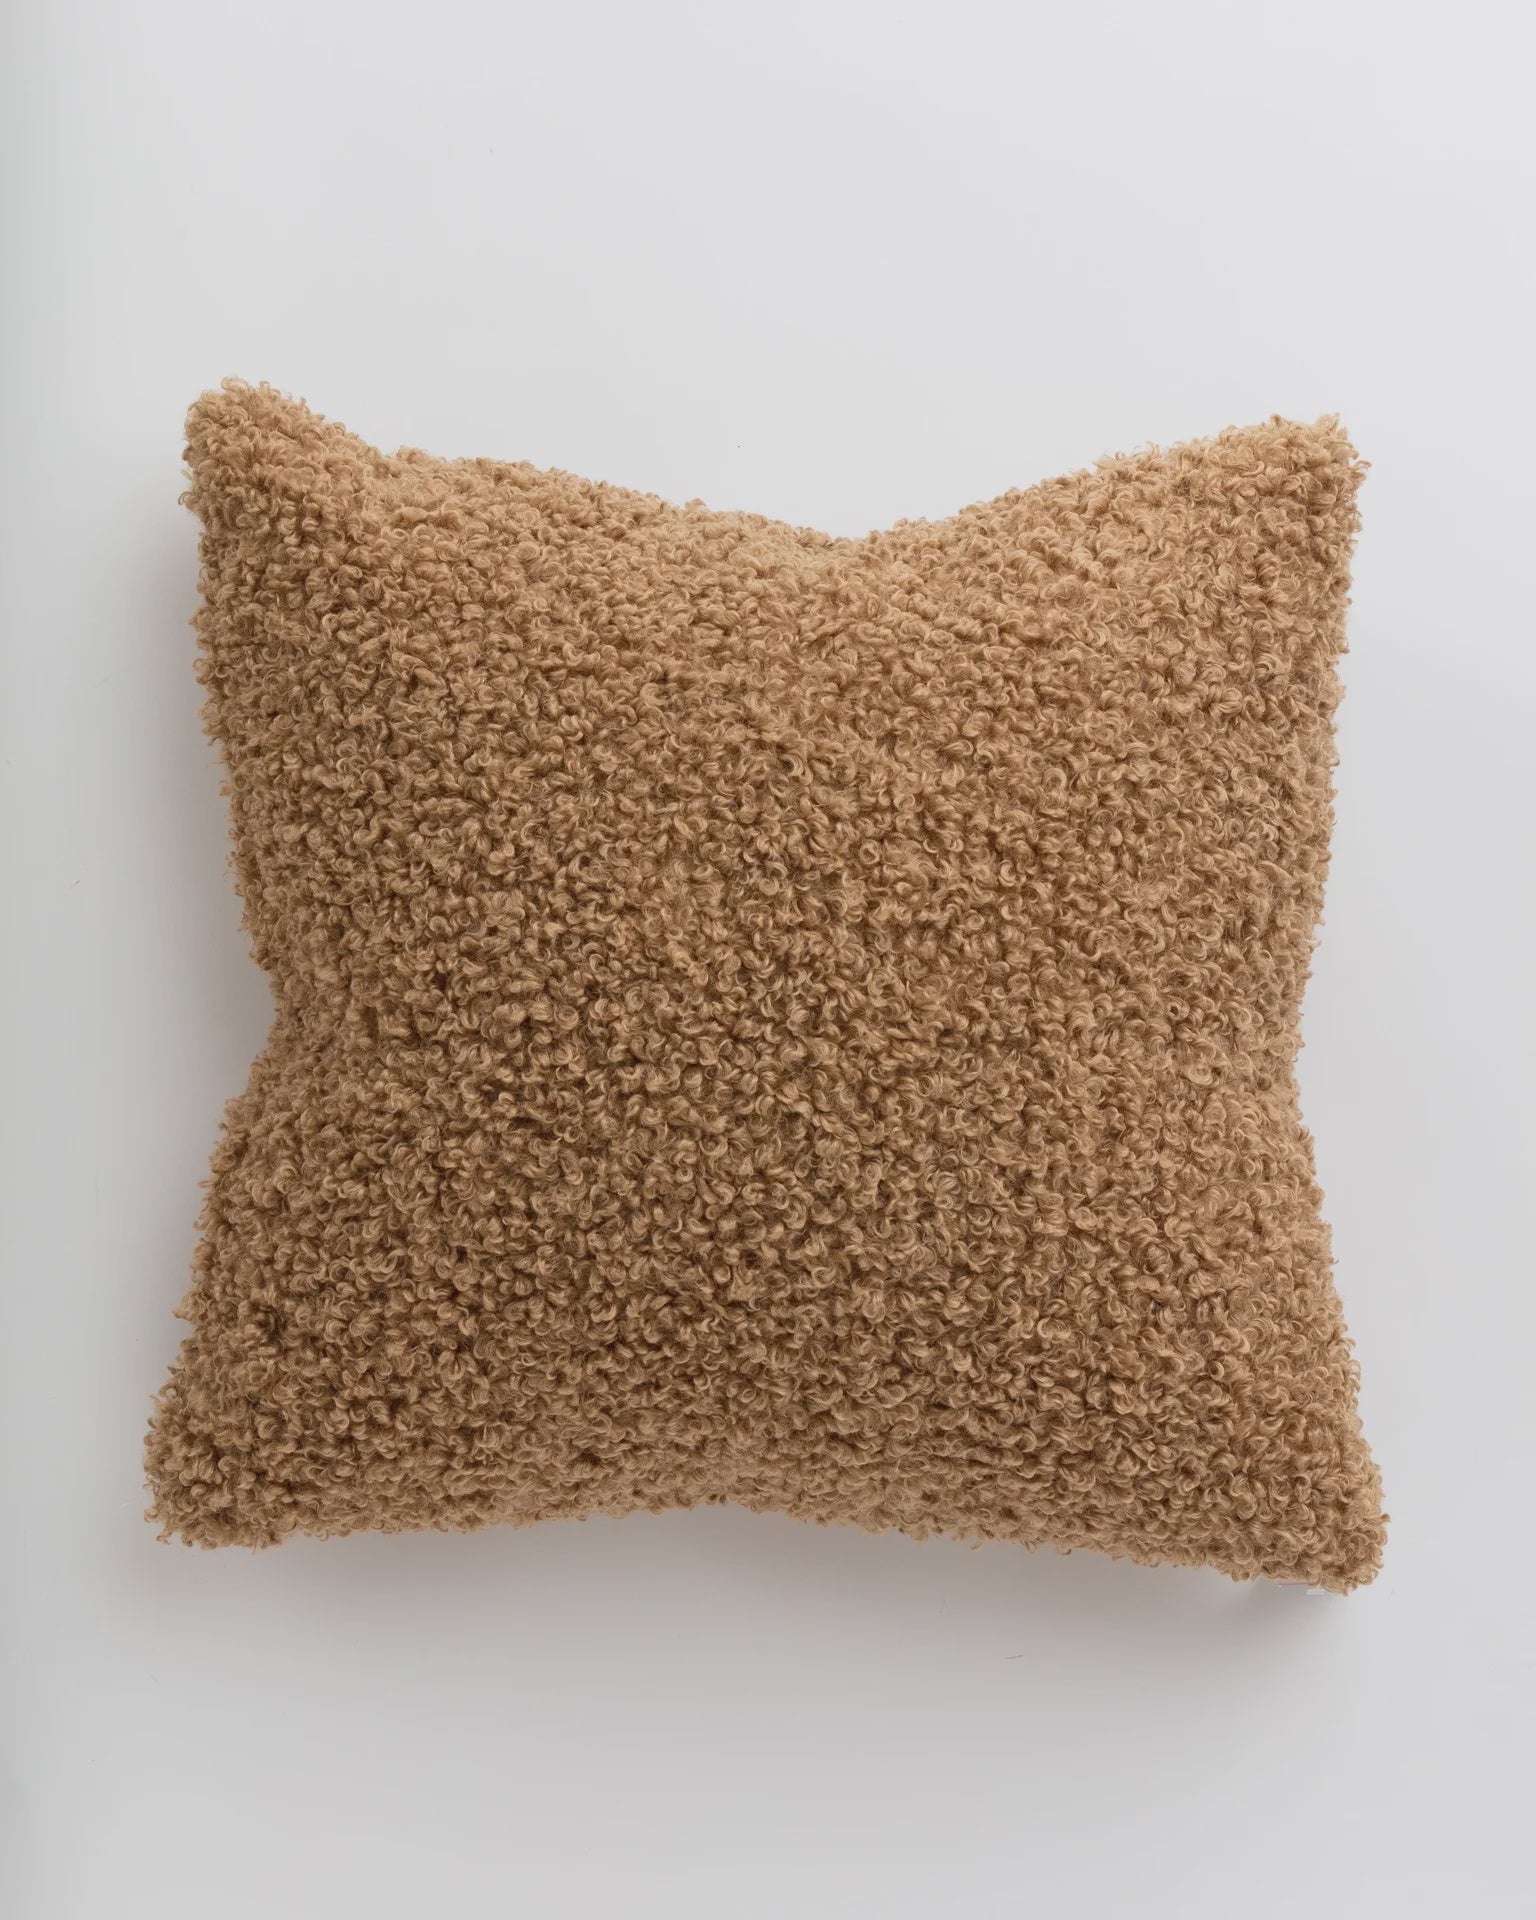 A fluffy, soft, light beige Curly Camel Pillow 26x26 with a textured surface, showcased against a plain white background in a Scottsdale Arizona bungalow by Gabby.